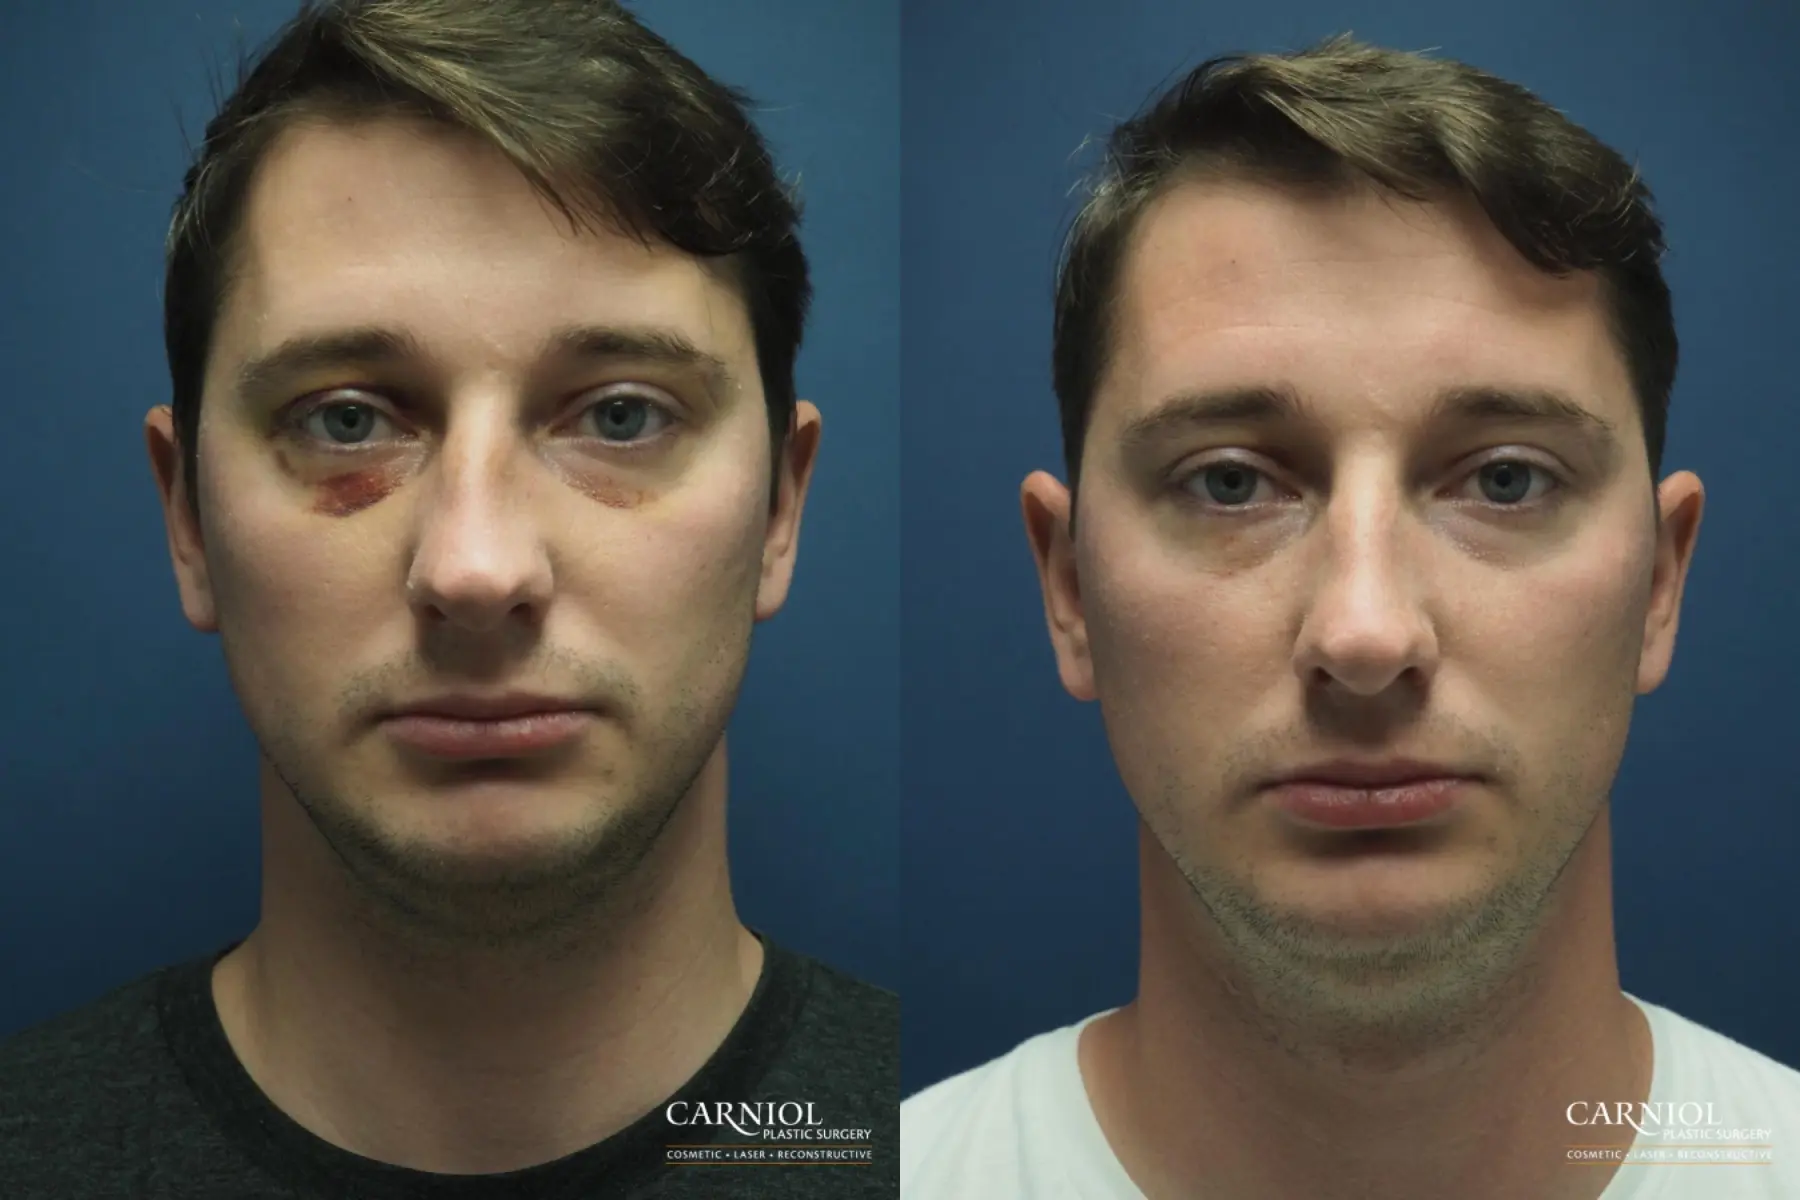 Rhinoplasty: Patient 4 - Before and After  